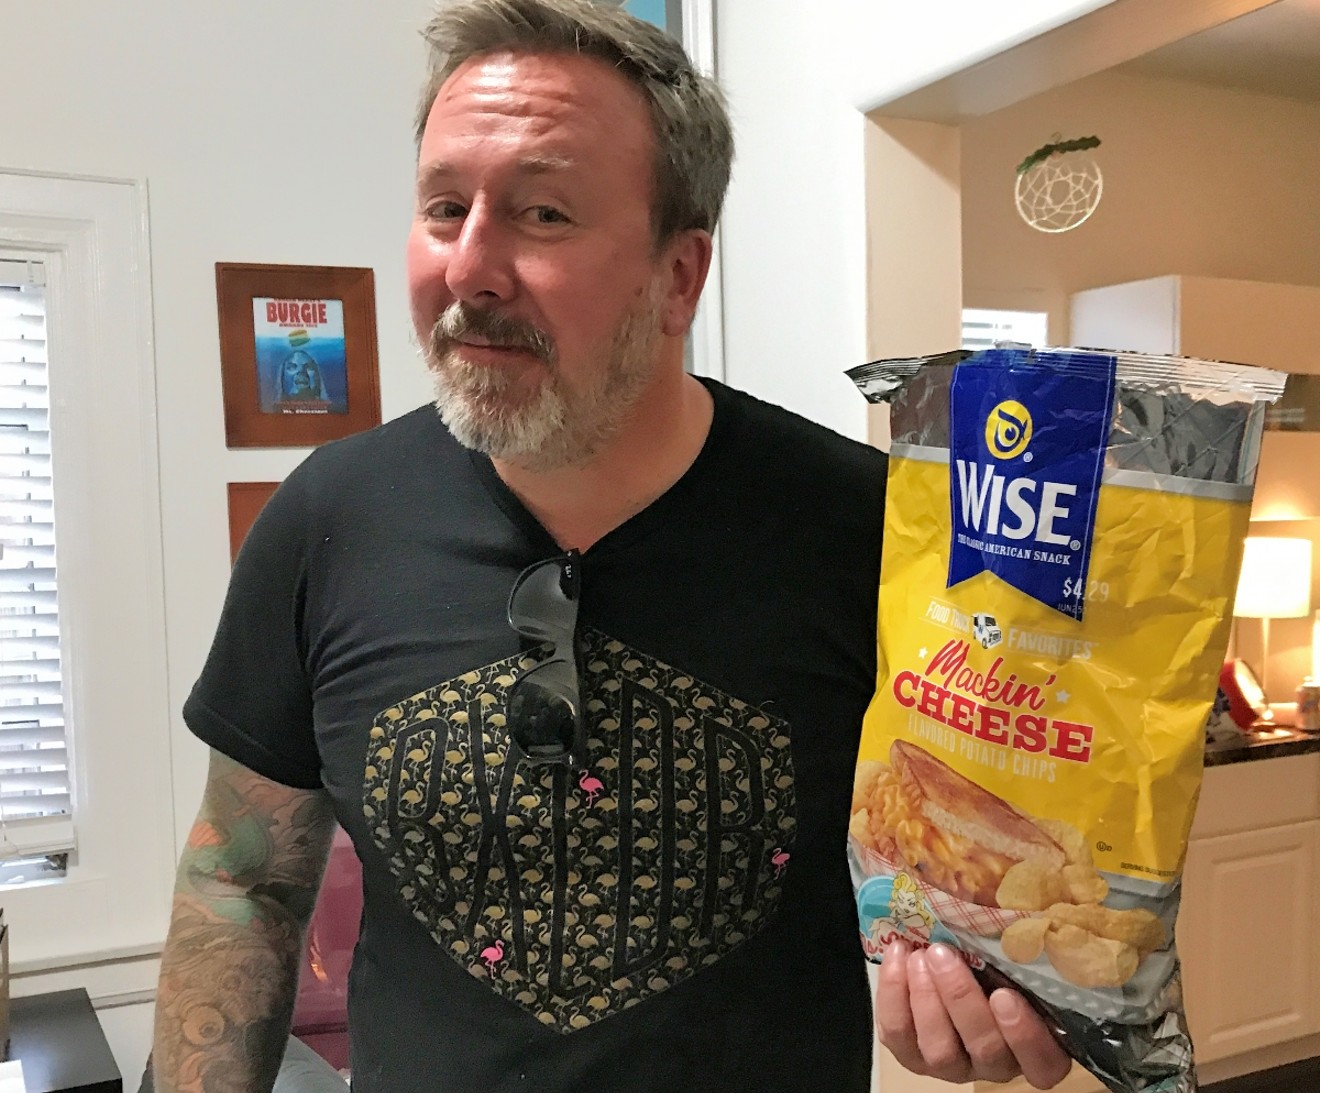 Brian Mullins with Wise's Mackin' Cheese potato chips.